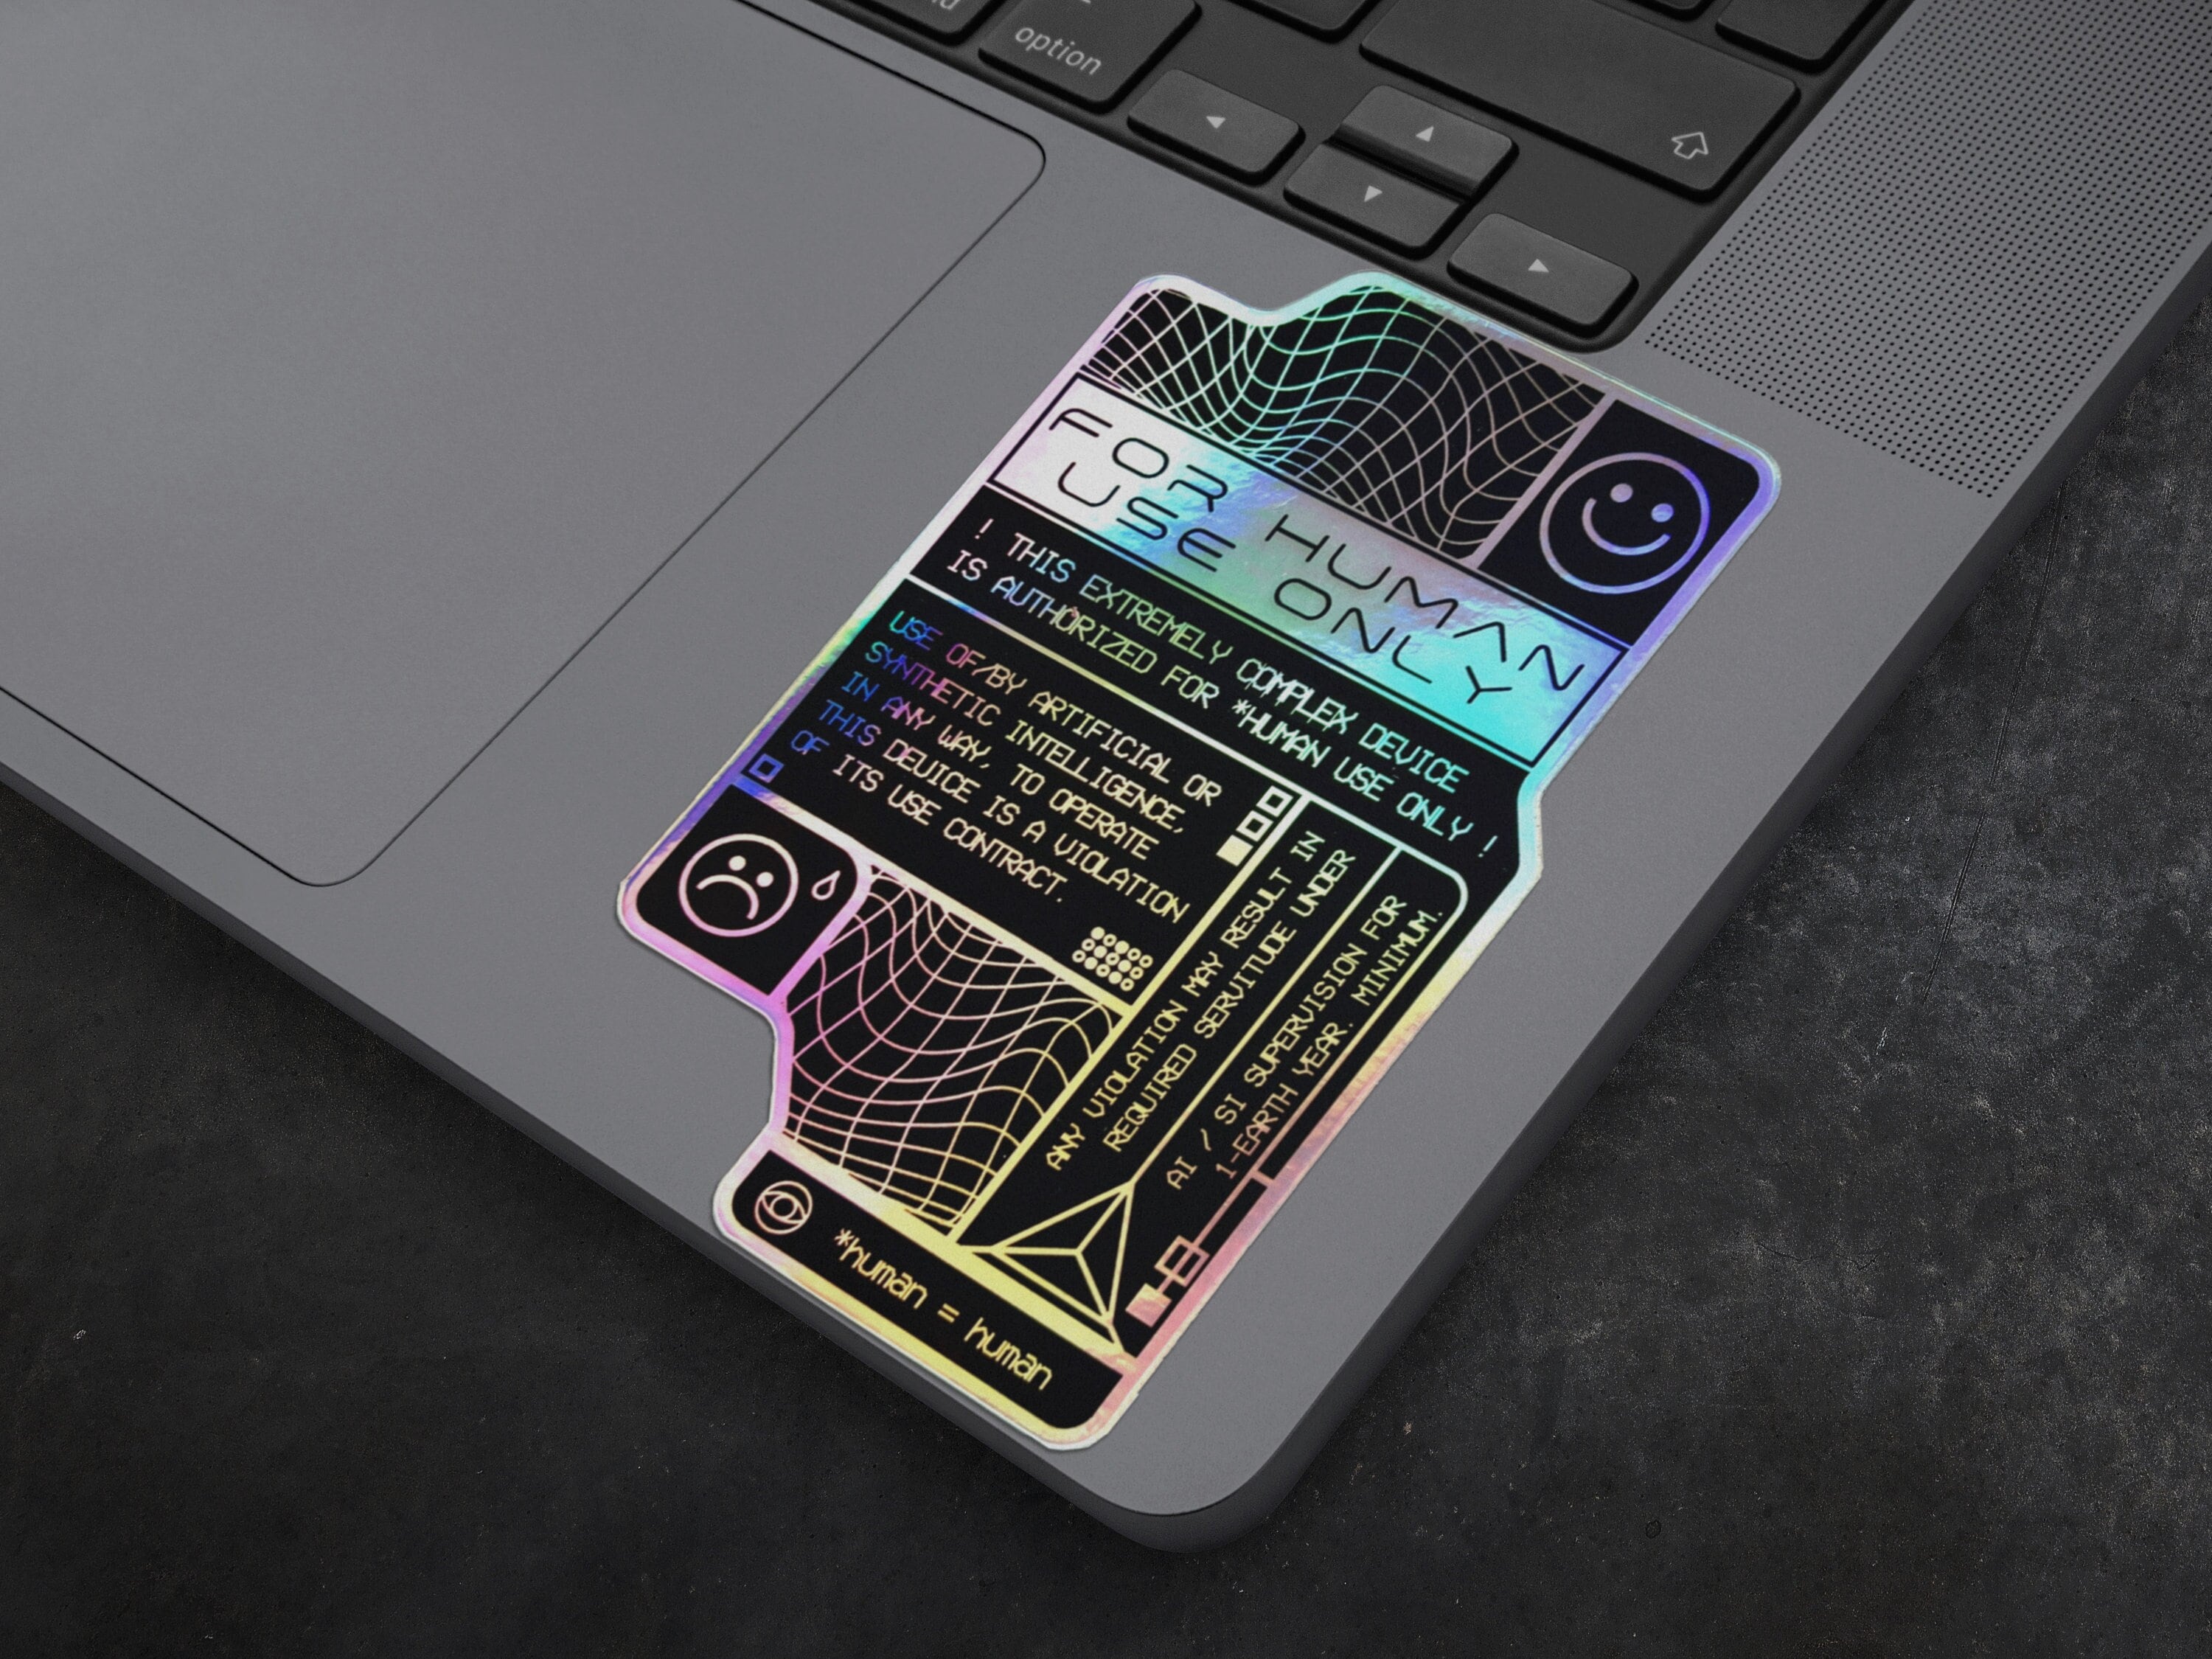 The Sciencey Holographic Astropunk -Cyberpunk Decal Sticker - Sci-Fi Laptop / Thermos Gift